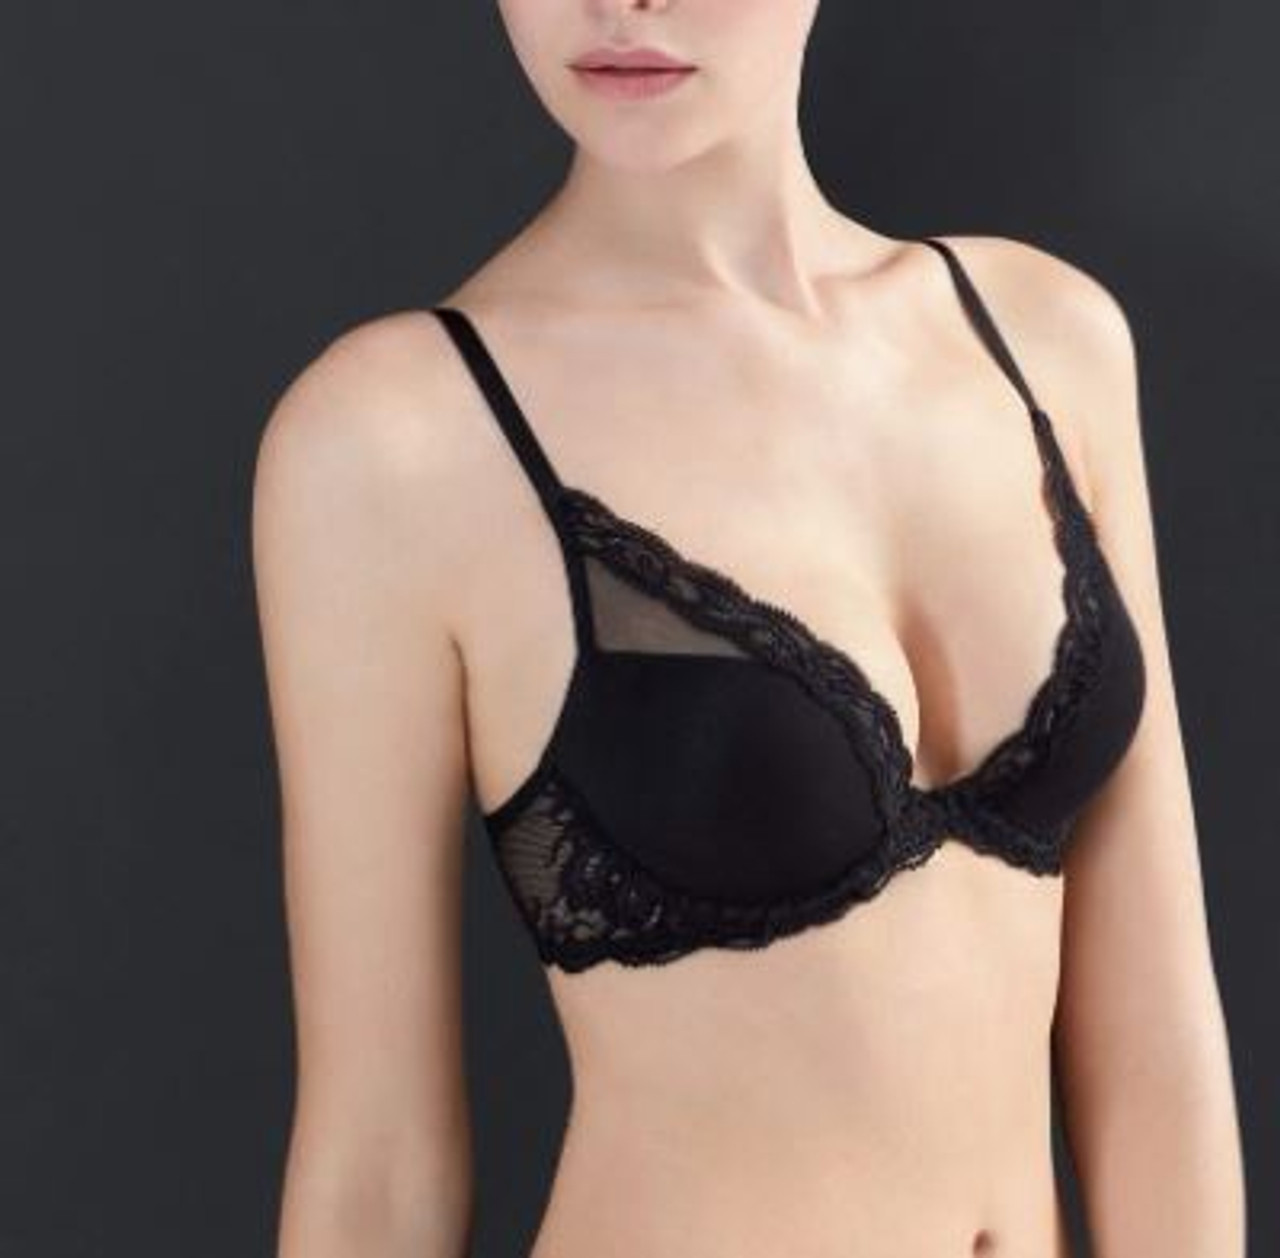 Natori Feathers Contour Plunge Bra in Ribbon Pink/Peach Pink FINAL SALE  (30% Off) - Busted Bra Shop